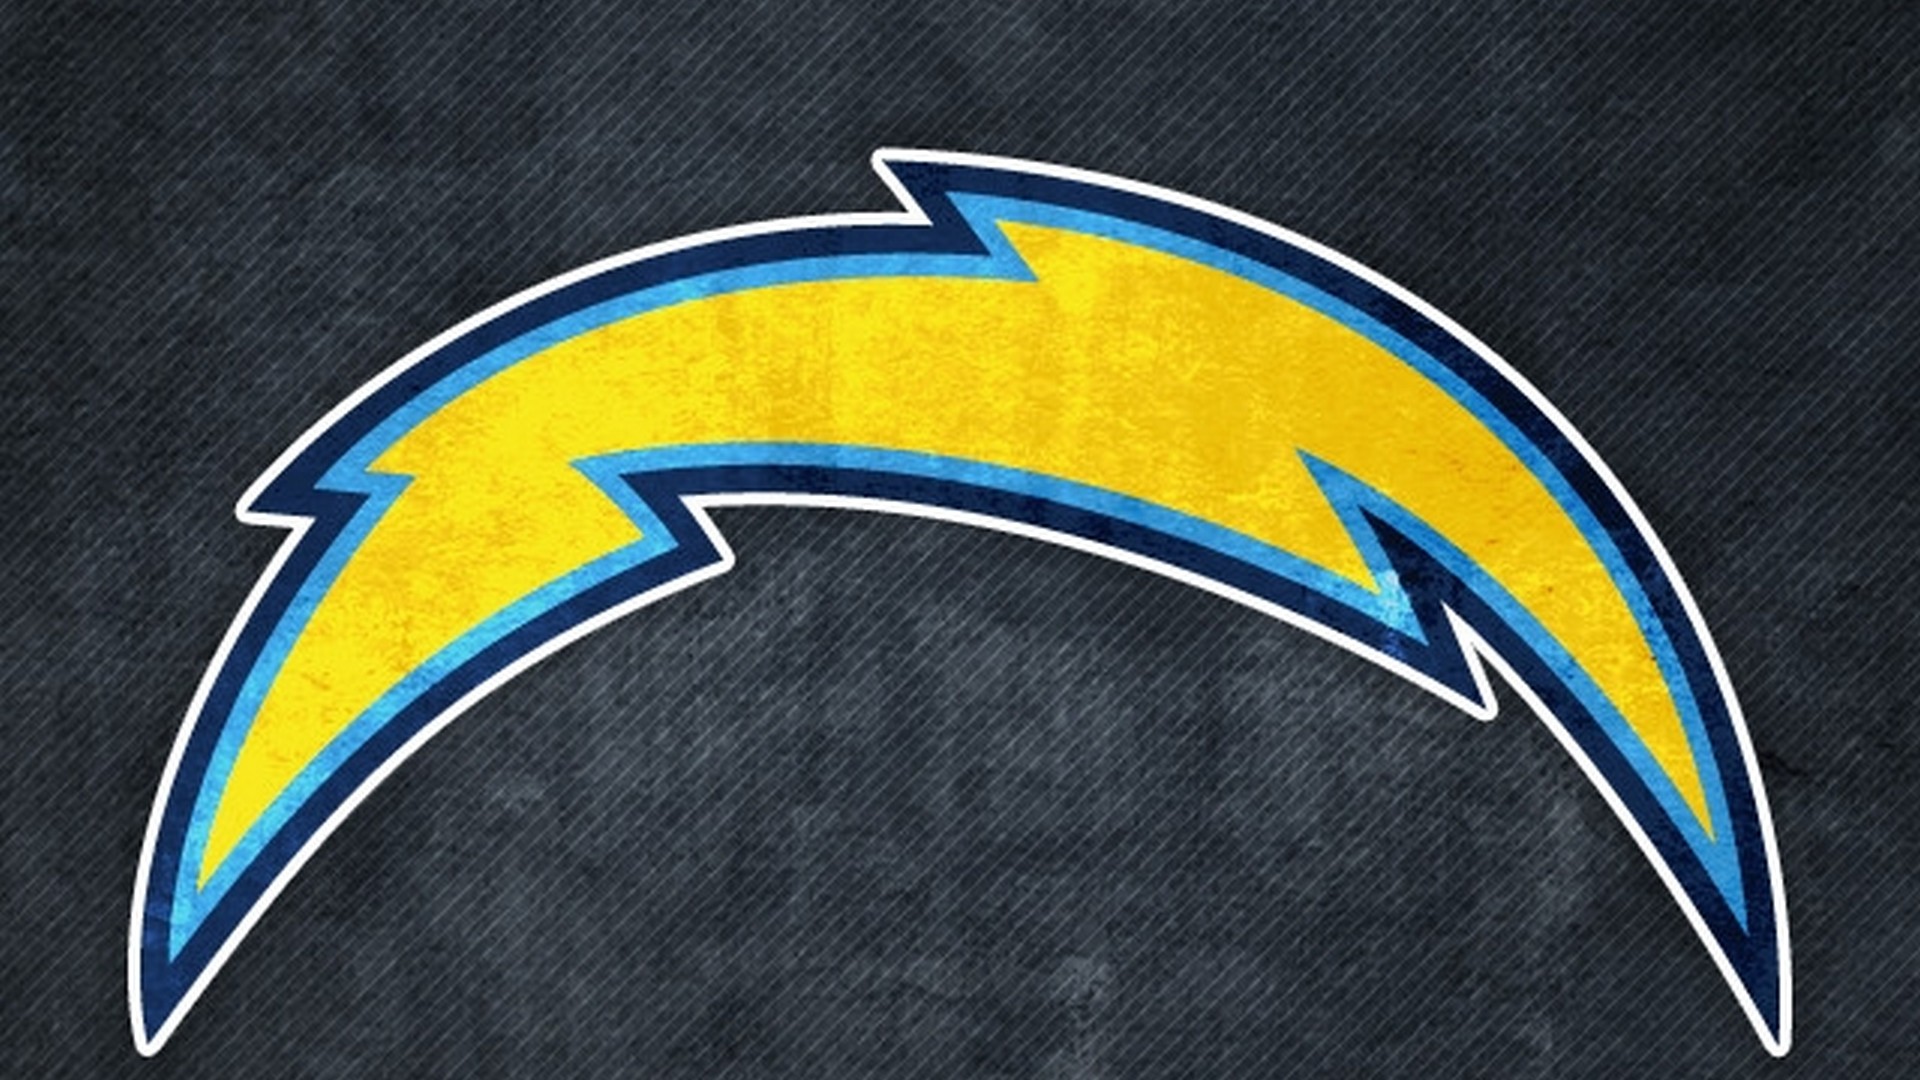 40 Los Angeles Chargers HD Wallpapers and Backgrounds